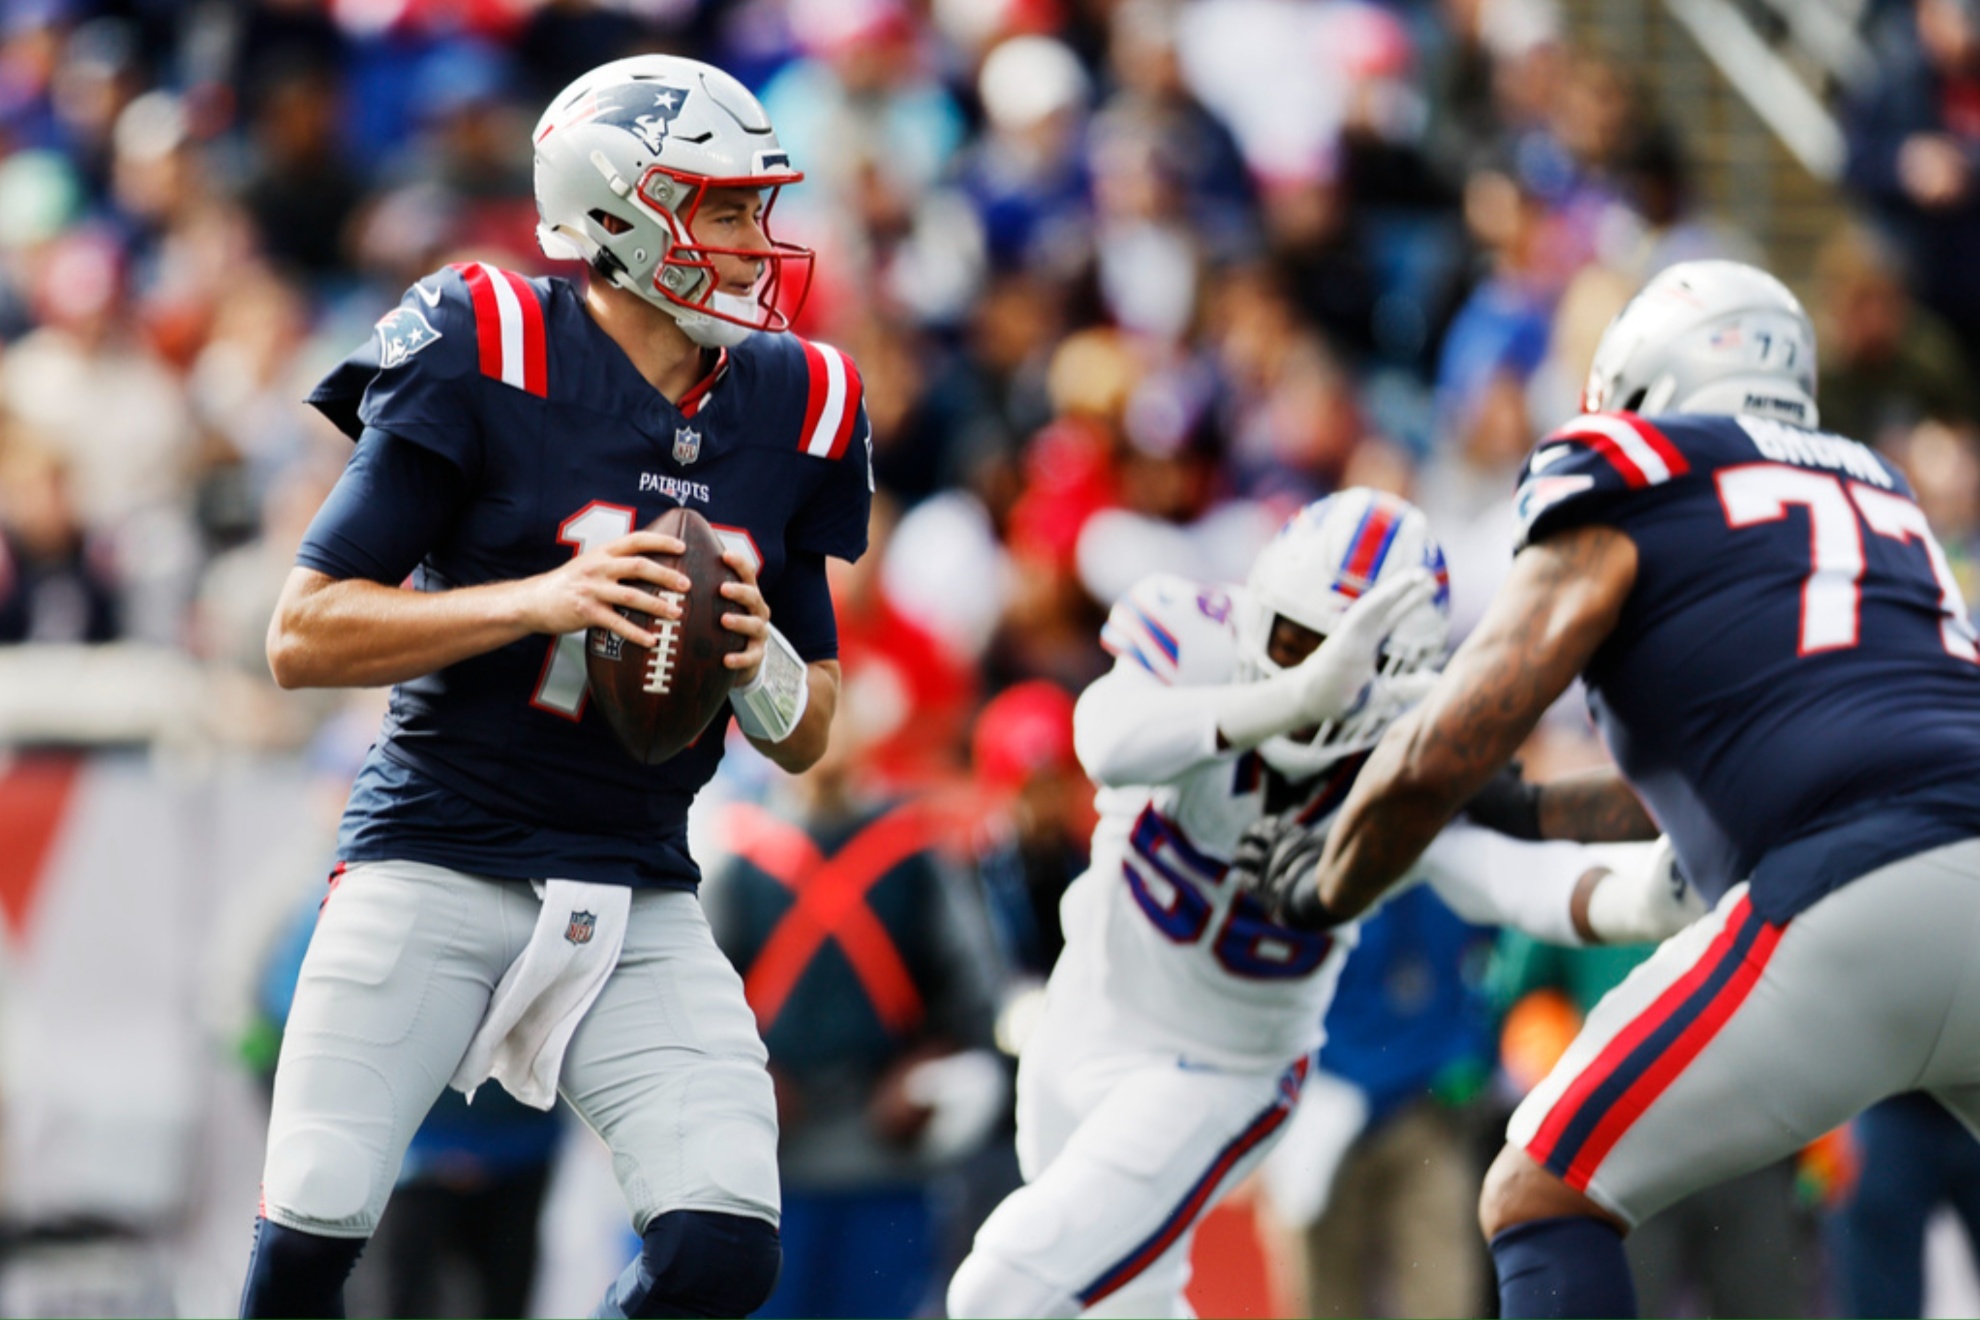 The Patriots won their second game of the season against the Buffalo Bills on Sunday